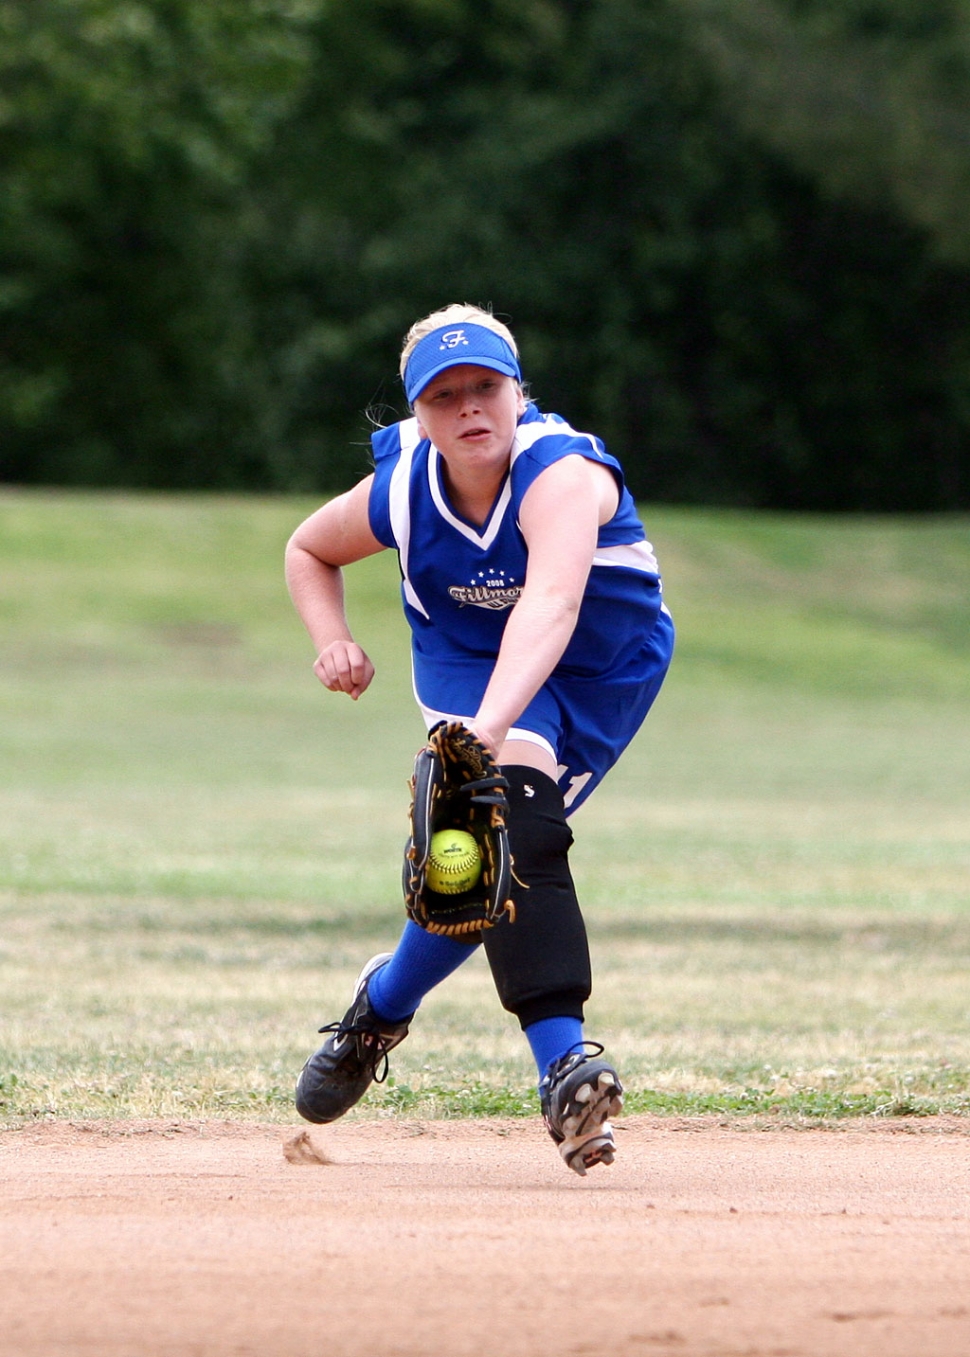 Sarah Scott (10& Under Allstars) makes a great catch during the game, Scott also hit a double with bases loaded to help win the game against Northridge.